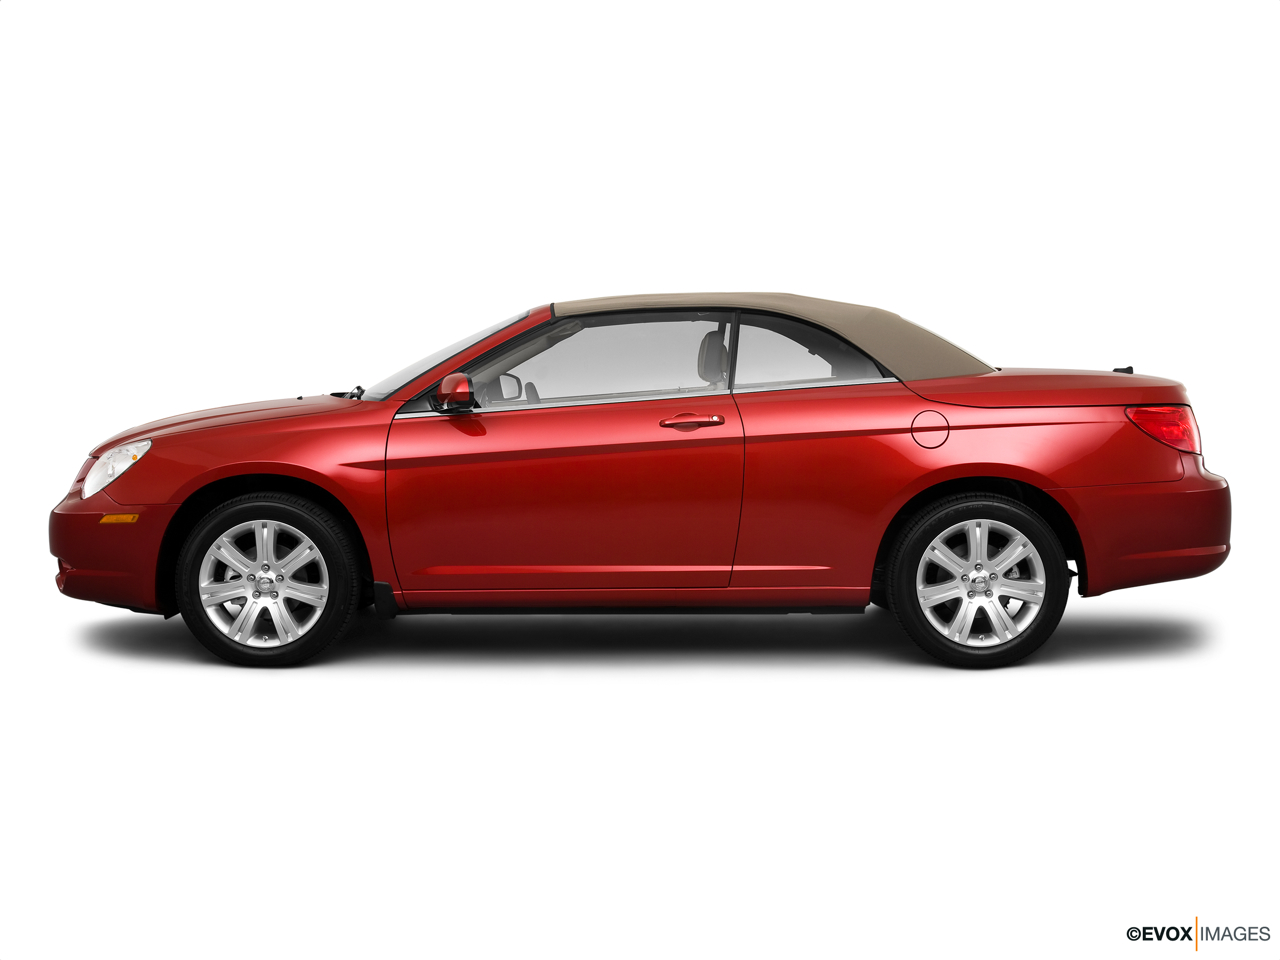 2010 Chrysler Sebring Touring Drivers side profile, convertible top up (convertibles only). 